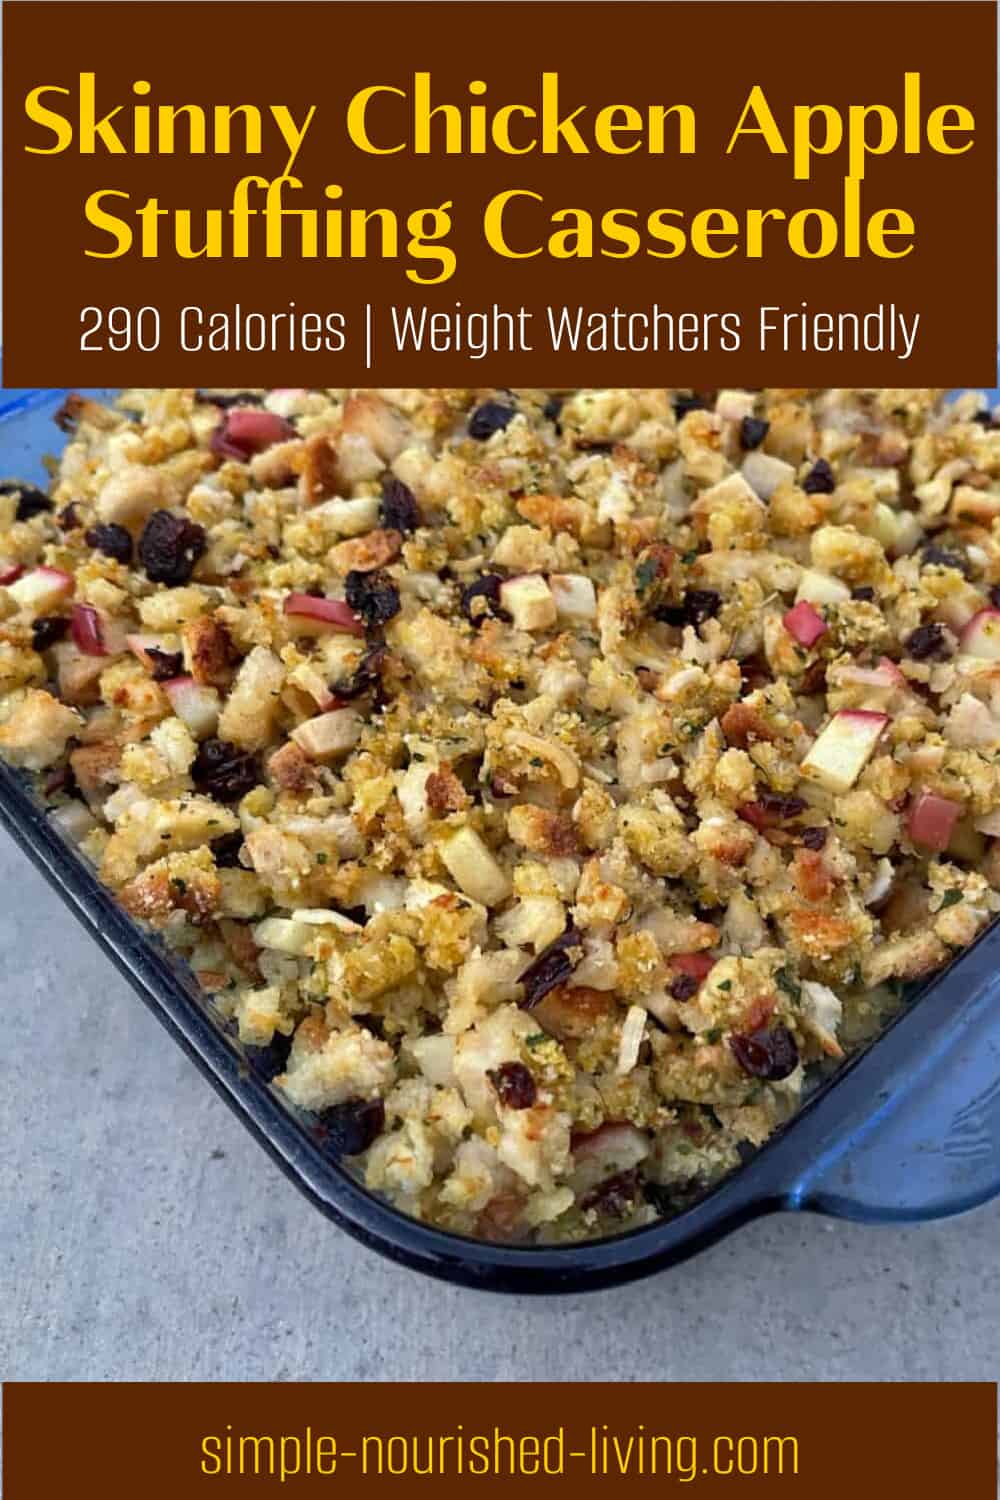 chicken stuffing casserole in blue glass baking dish from above with title text for pinterest pin